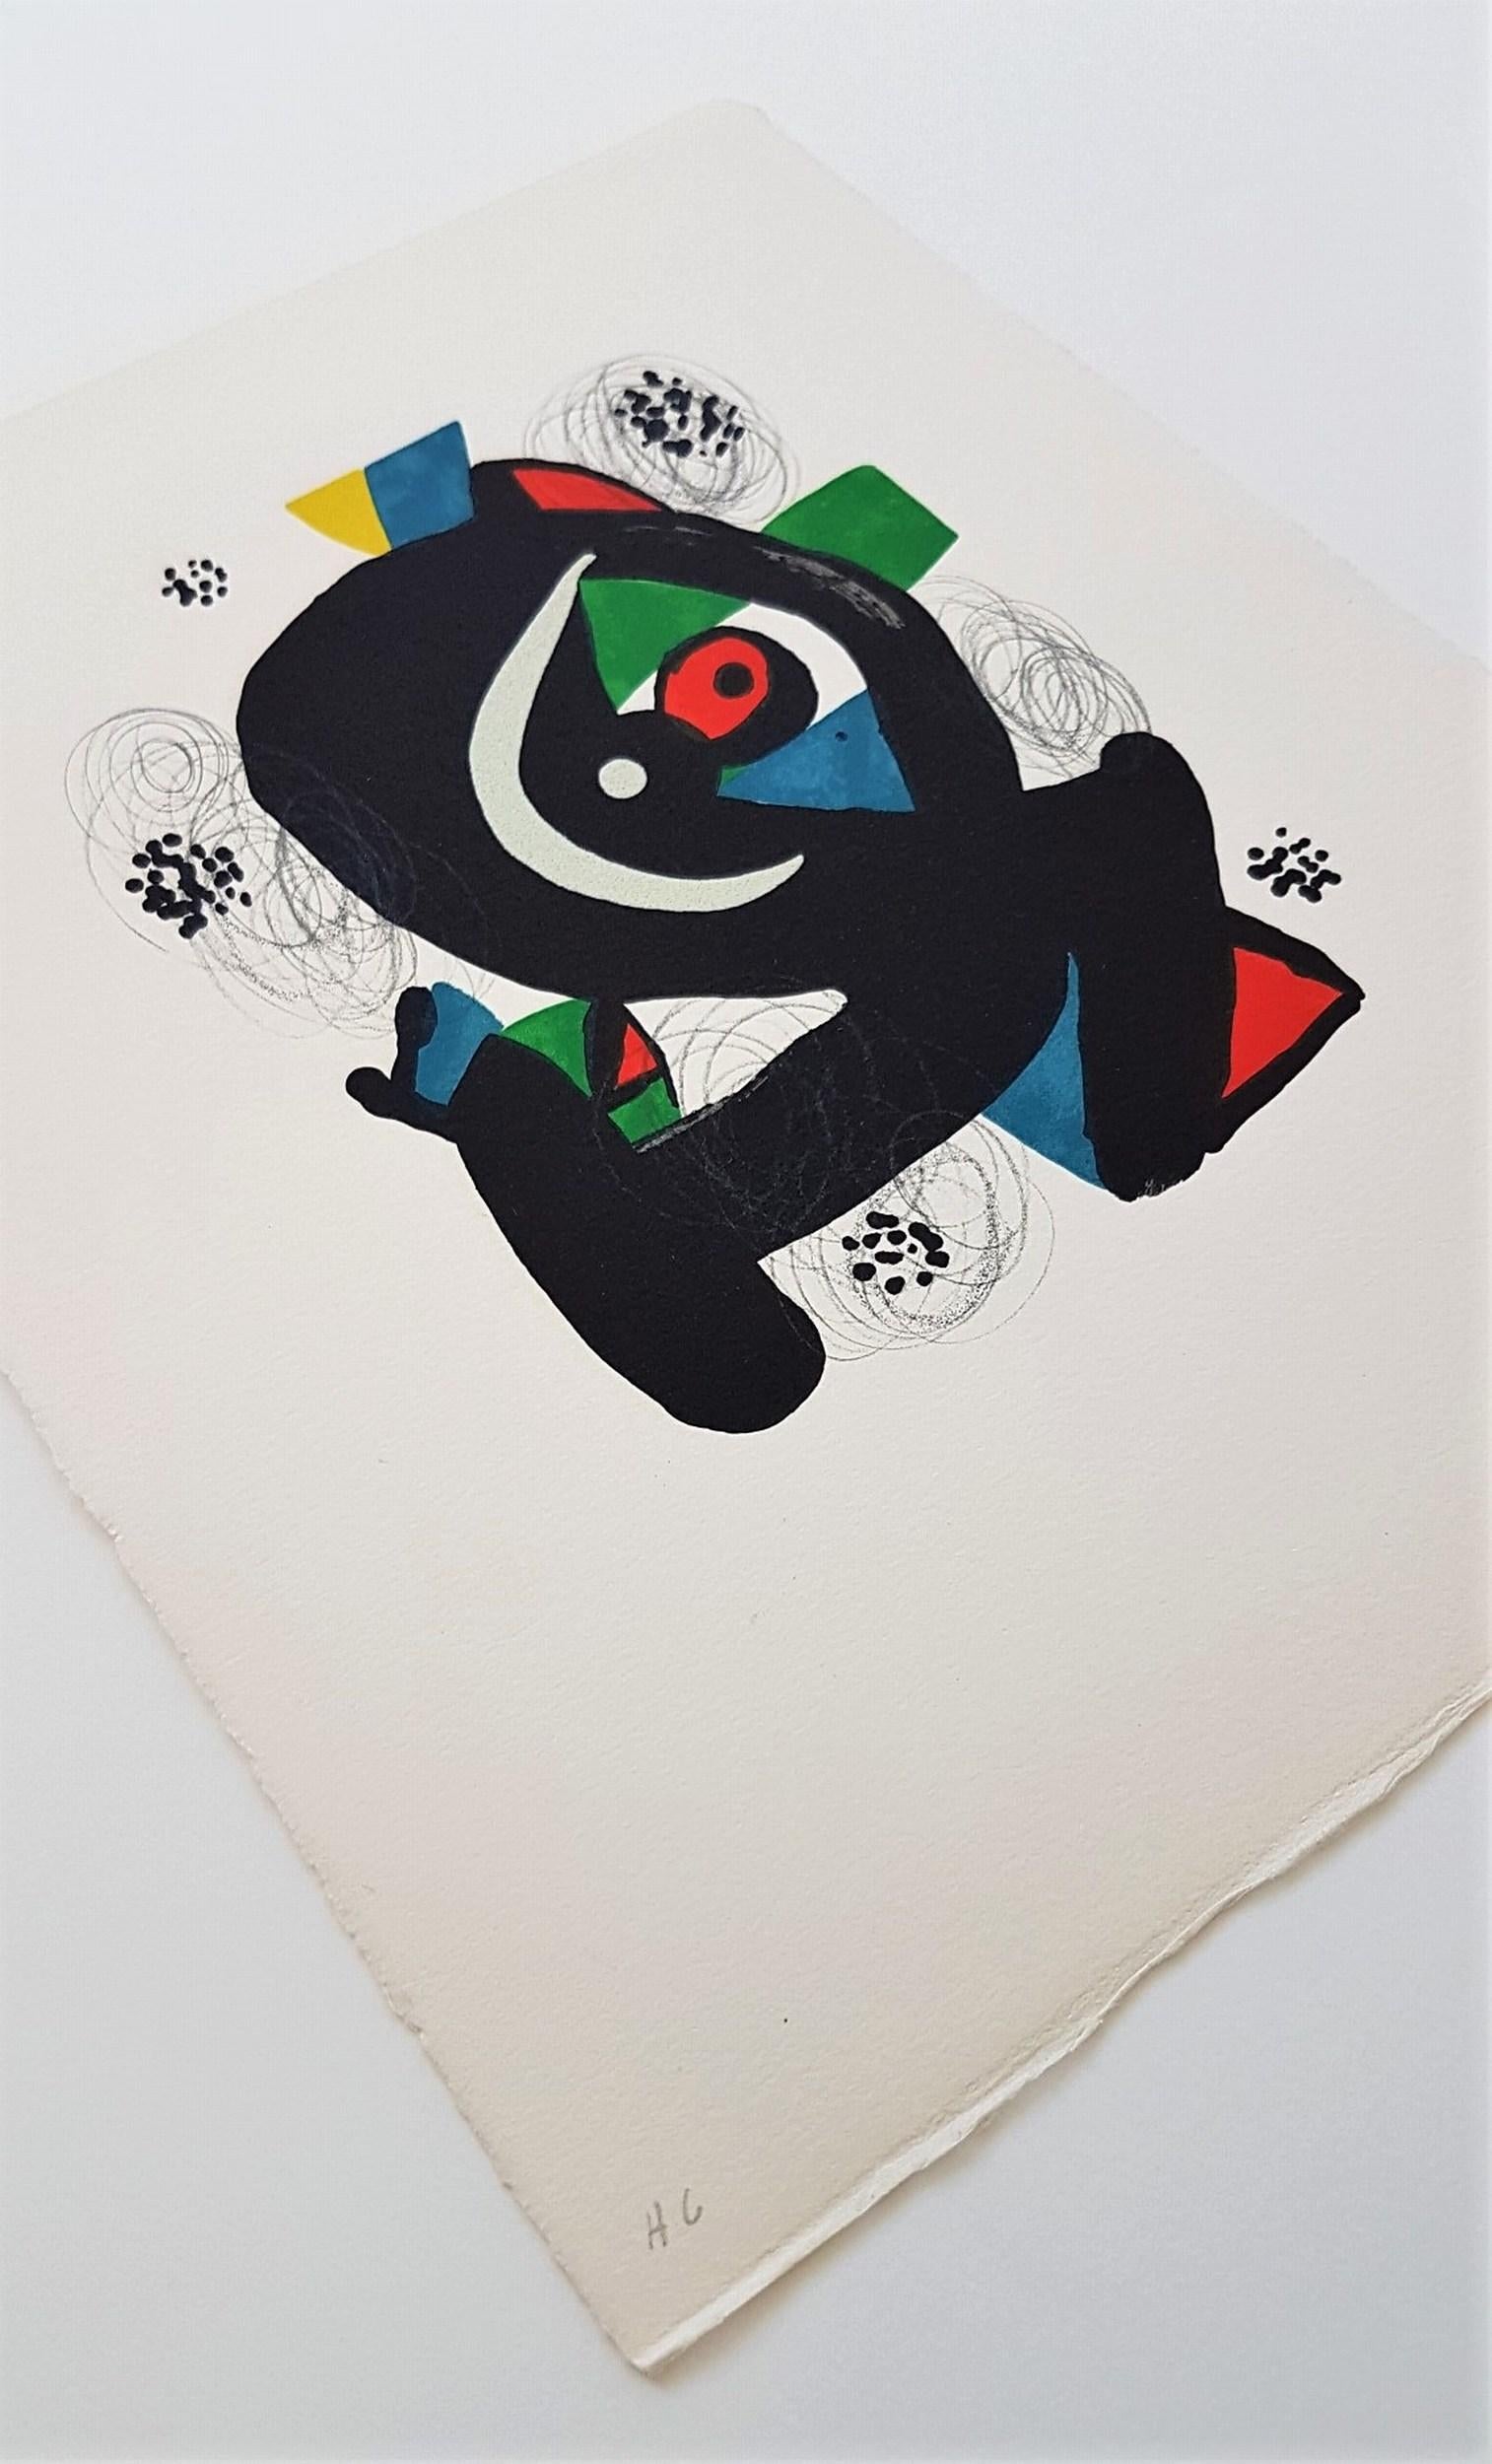 Joan Miró
La Mélodie Acide - 2
Color lithograph
Year: 1980
Edition: 101 + VII + 11 HC 
Artist Dry Stamp lower right, 
Annotated  